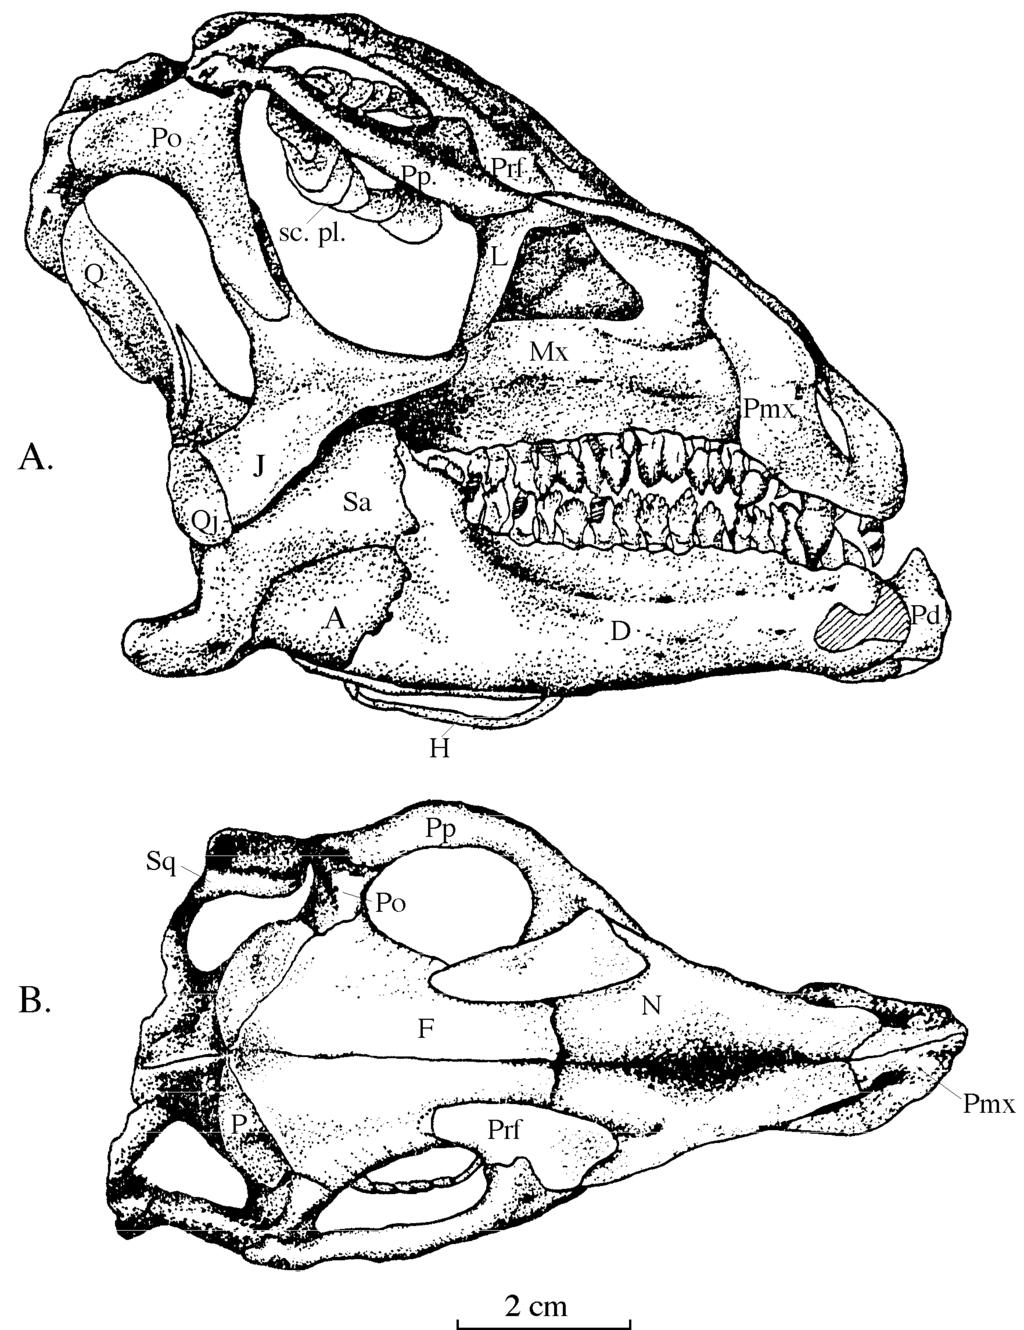 3 dorsally to form the posterior wall of the supratemporal fenestra and to connect with the squamosal.